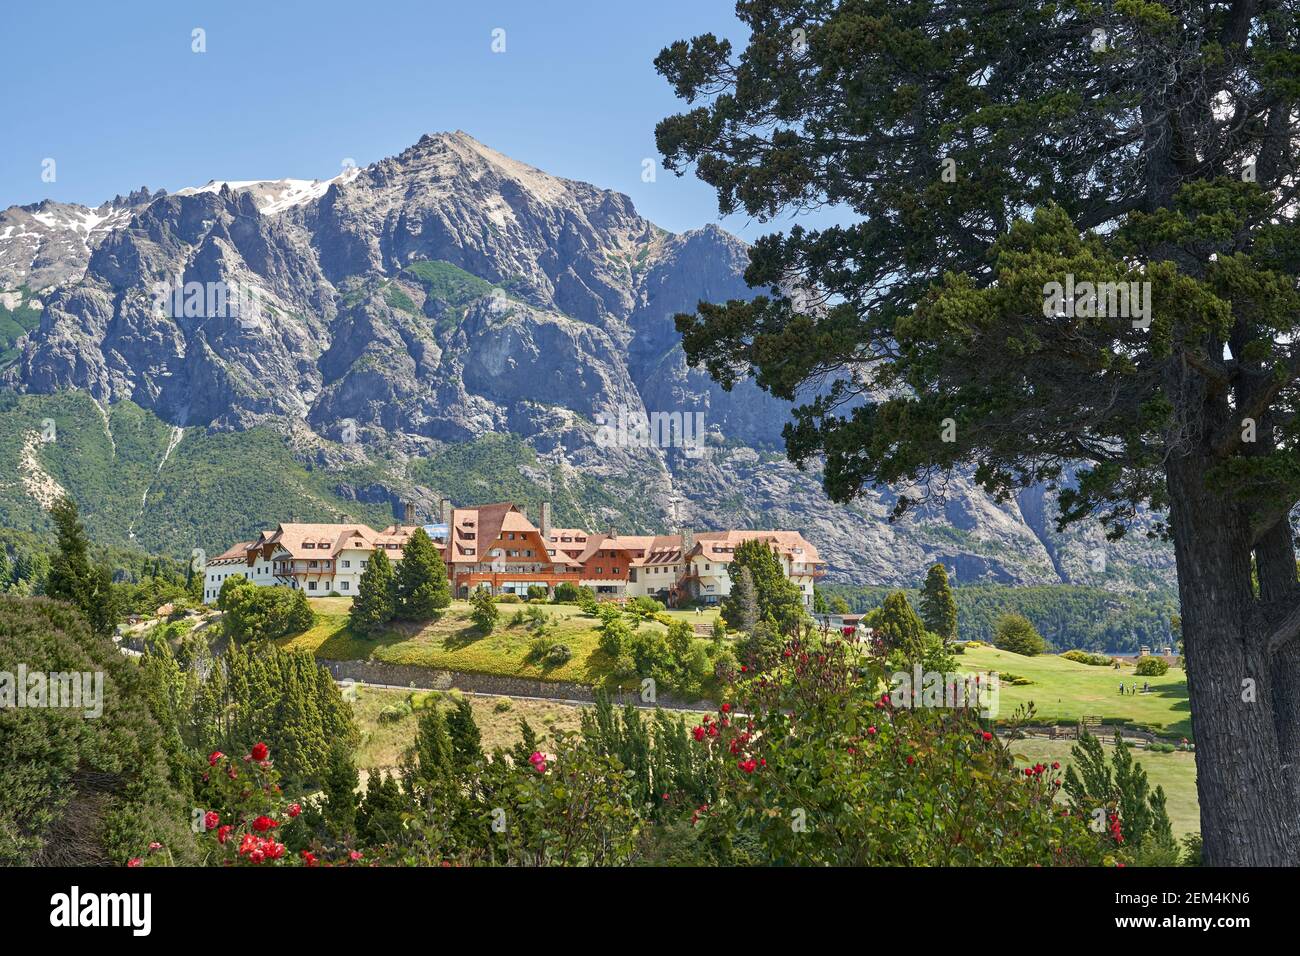 Nice Hotel overlooking the valley near Llao Llao close to Colonia Suiza and Bariloche in Patagonia, Argentina, South America with the Andes Mountain i Stock Photo